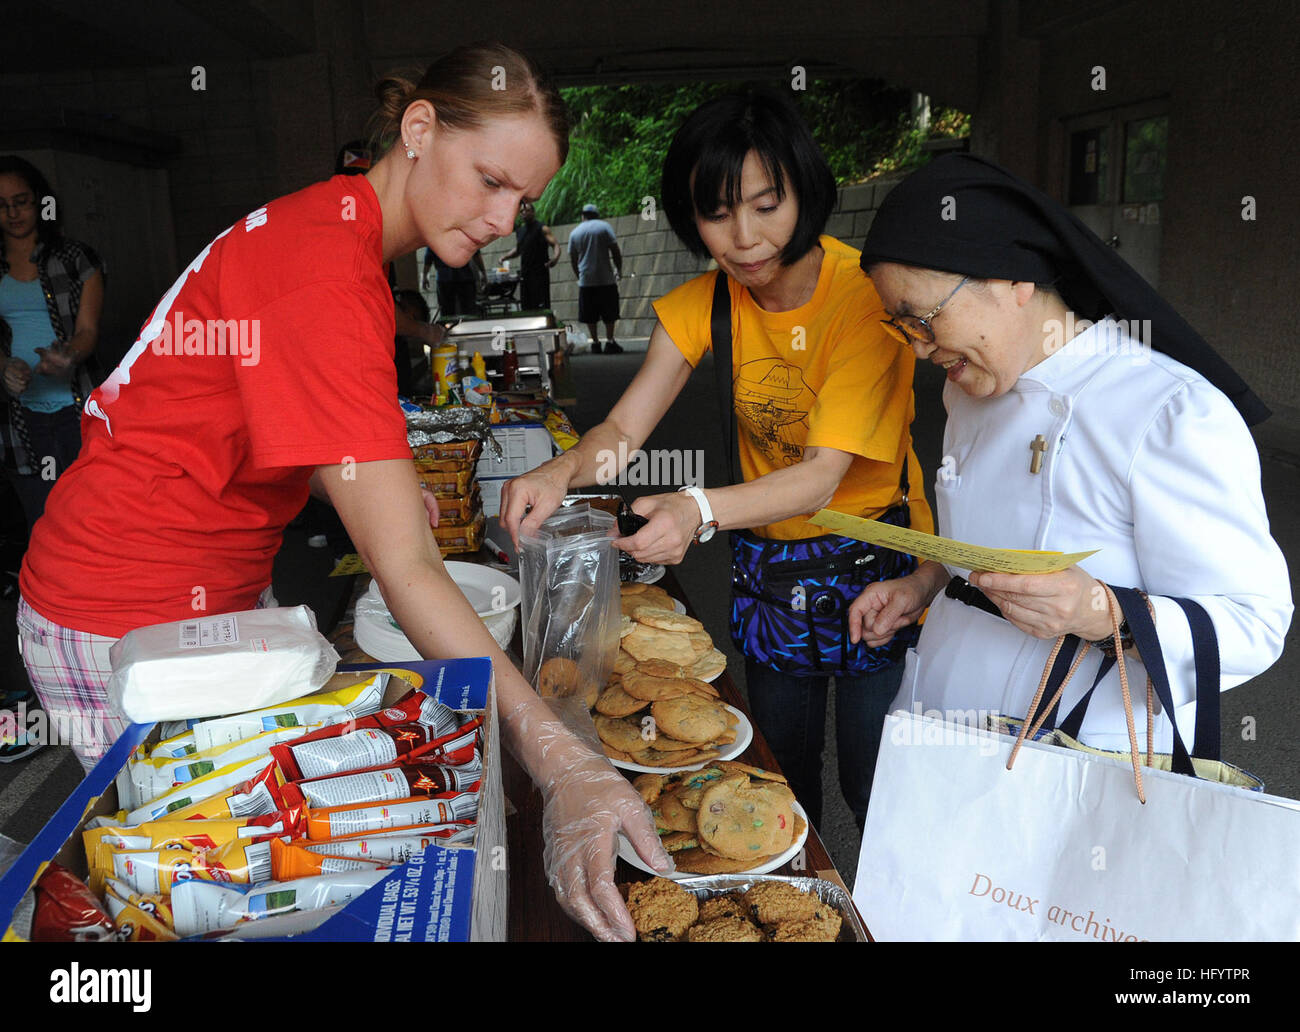 110605-N-VE260-056 FUJISAWA, Japan (June 10, 2011) Aviation Machinist's Mate Airman Heather Wolff, left, and Sumie Maruyama help a nun pick out cookies during the Misono Kodomo-ne-ie Orphanage Festival. Maruyama is from the Host Nation Relations Office at Naval Air Facility Atsugi. This is the second year that Sailors from Naval Air Facility Atsugi volunteered at the event. (U.S. Navy photo by Mass Communication Specialist 2nd Class Justin Smelley/Released) US Navy 110605-N-VE260-056 Aviation Machinist's Mate Airman Heather Wolff, left, and Sumie Maruyama help a nun pick out cookies during the Stock Photo